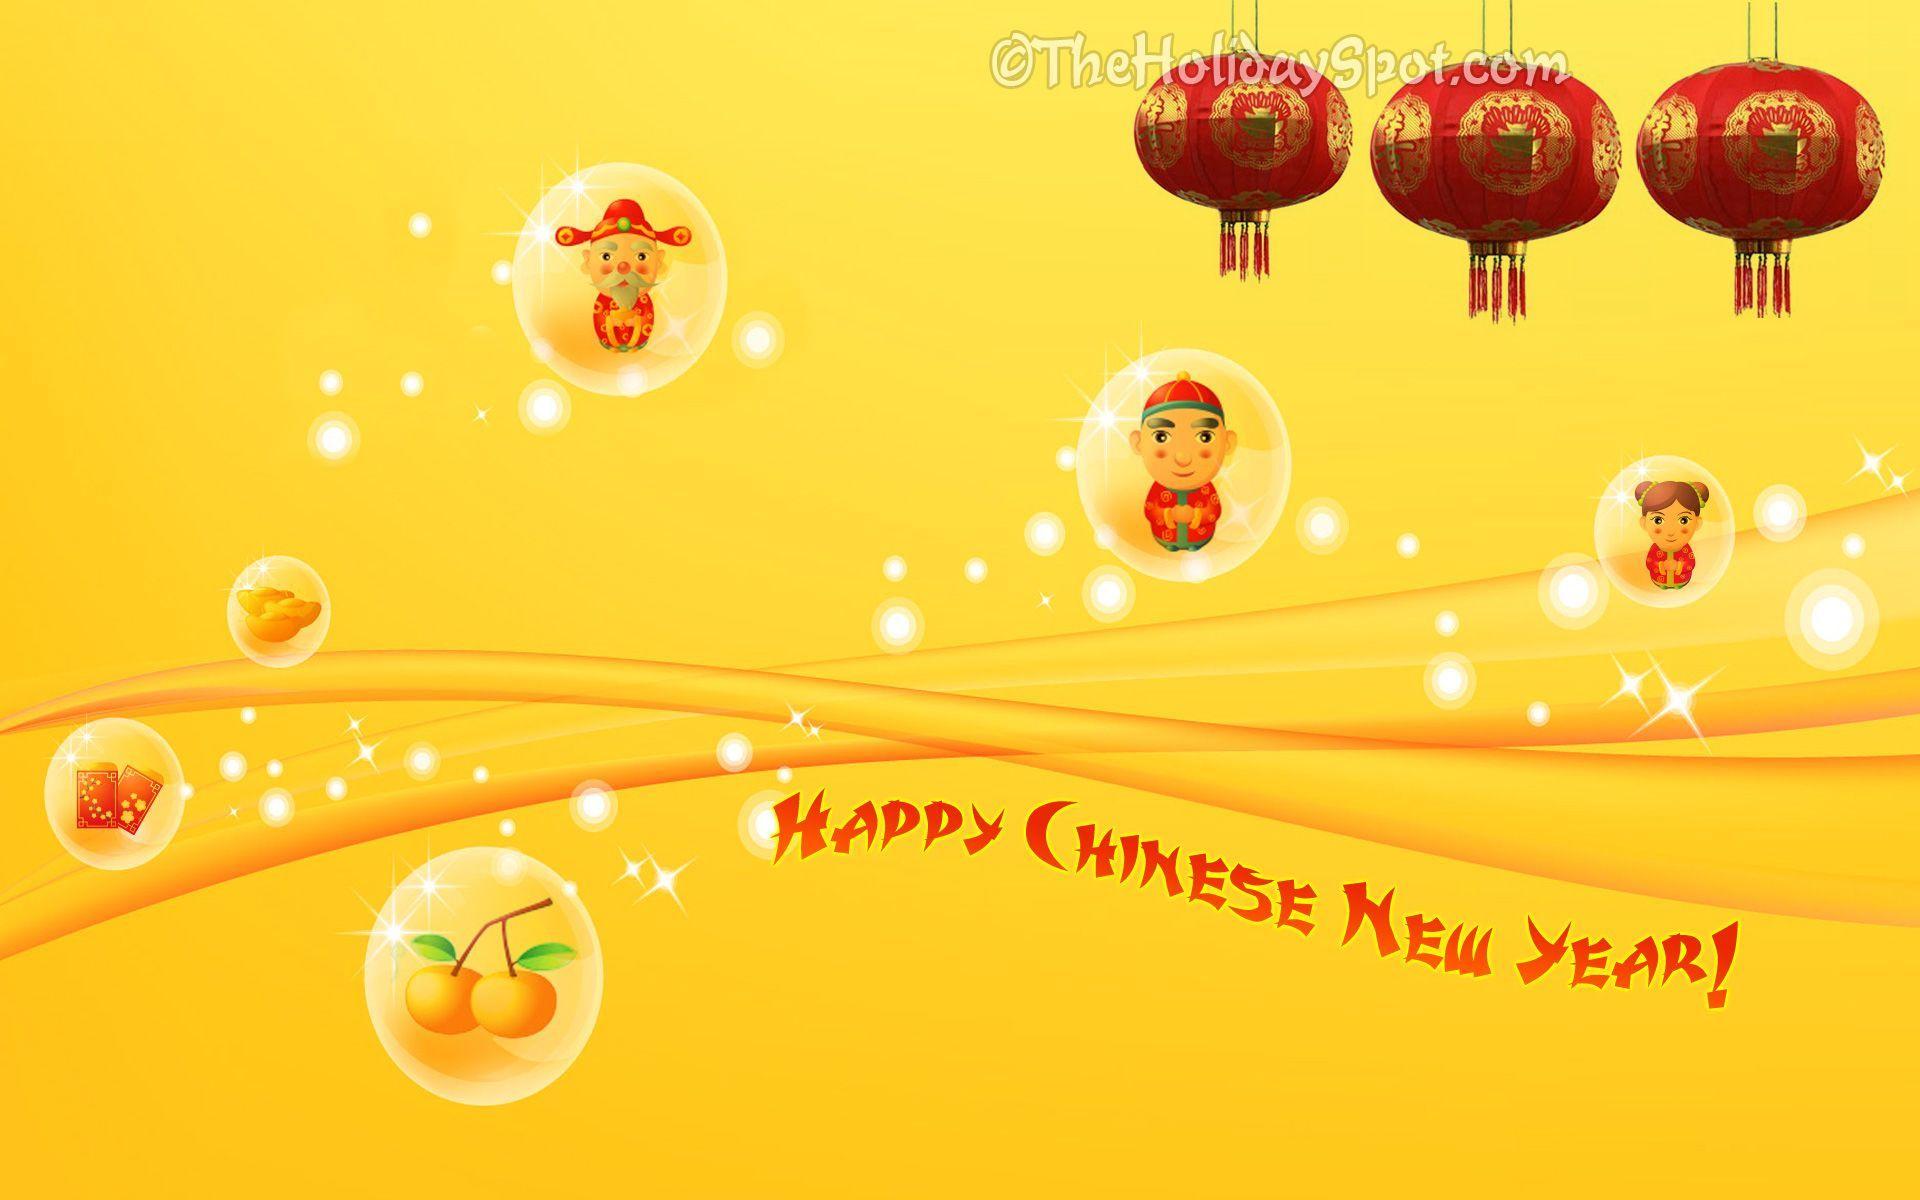 Cute Chinese New Year Wallpaper for desktop. Chinese new